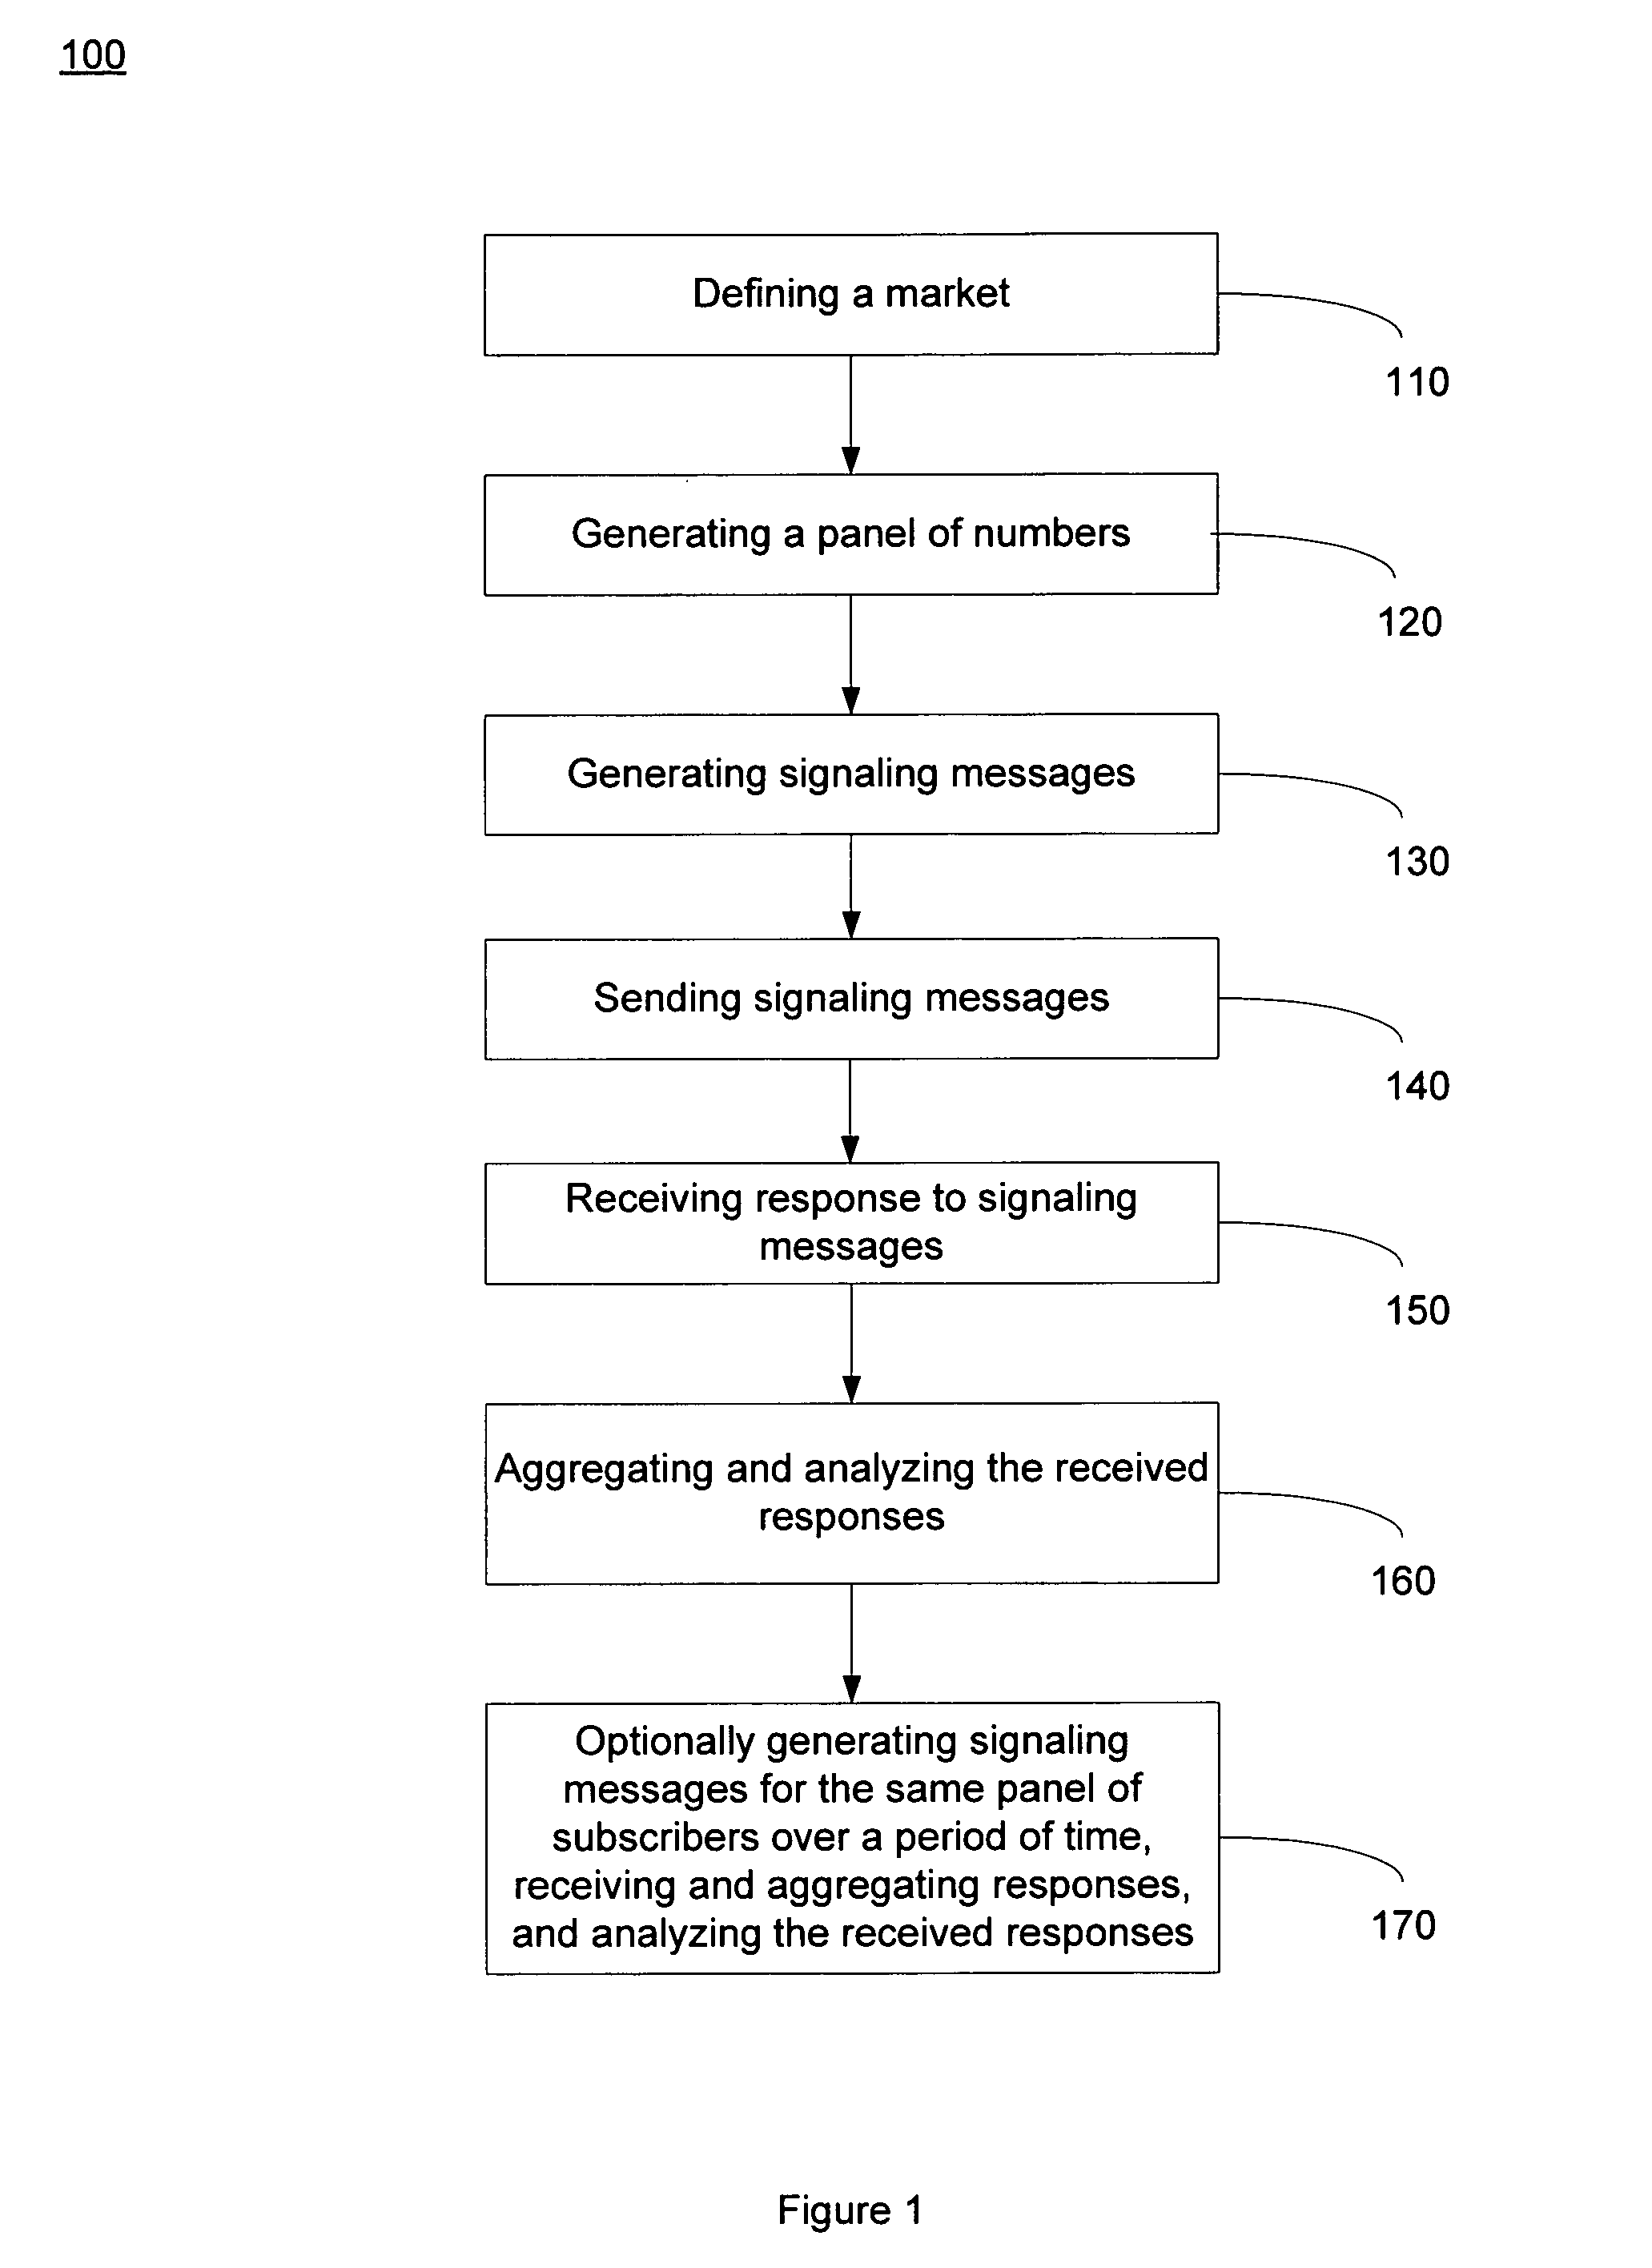 Method and system for measuring market-share for an entire telecommunication market